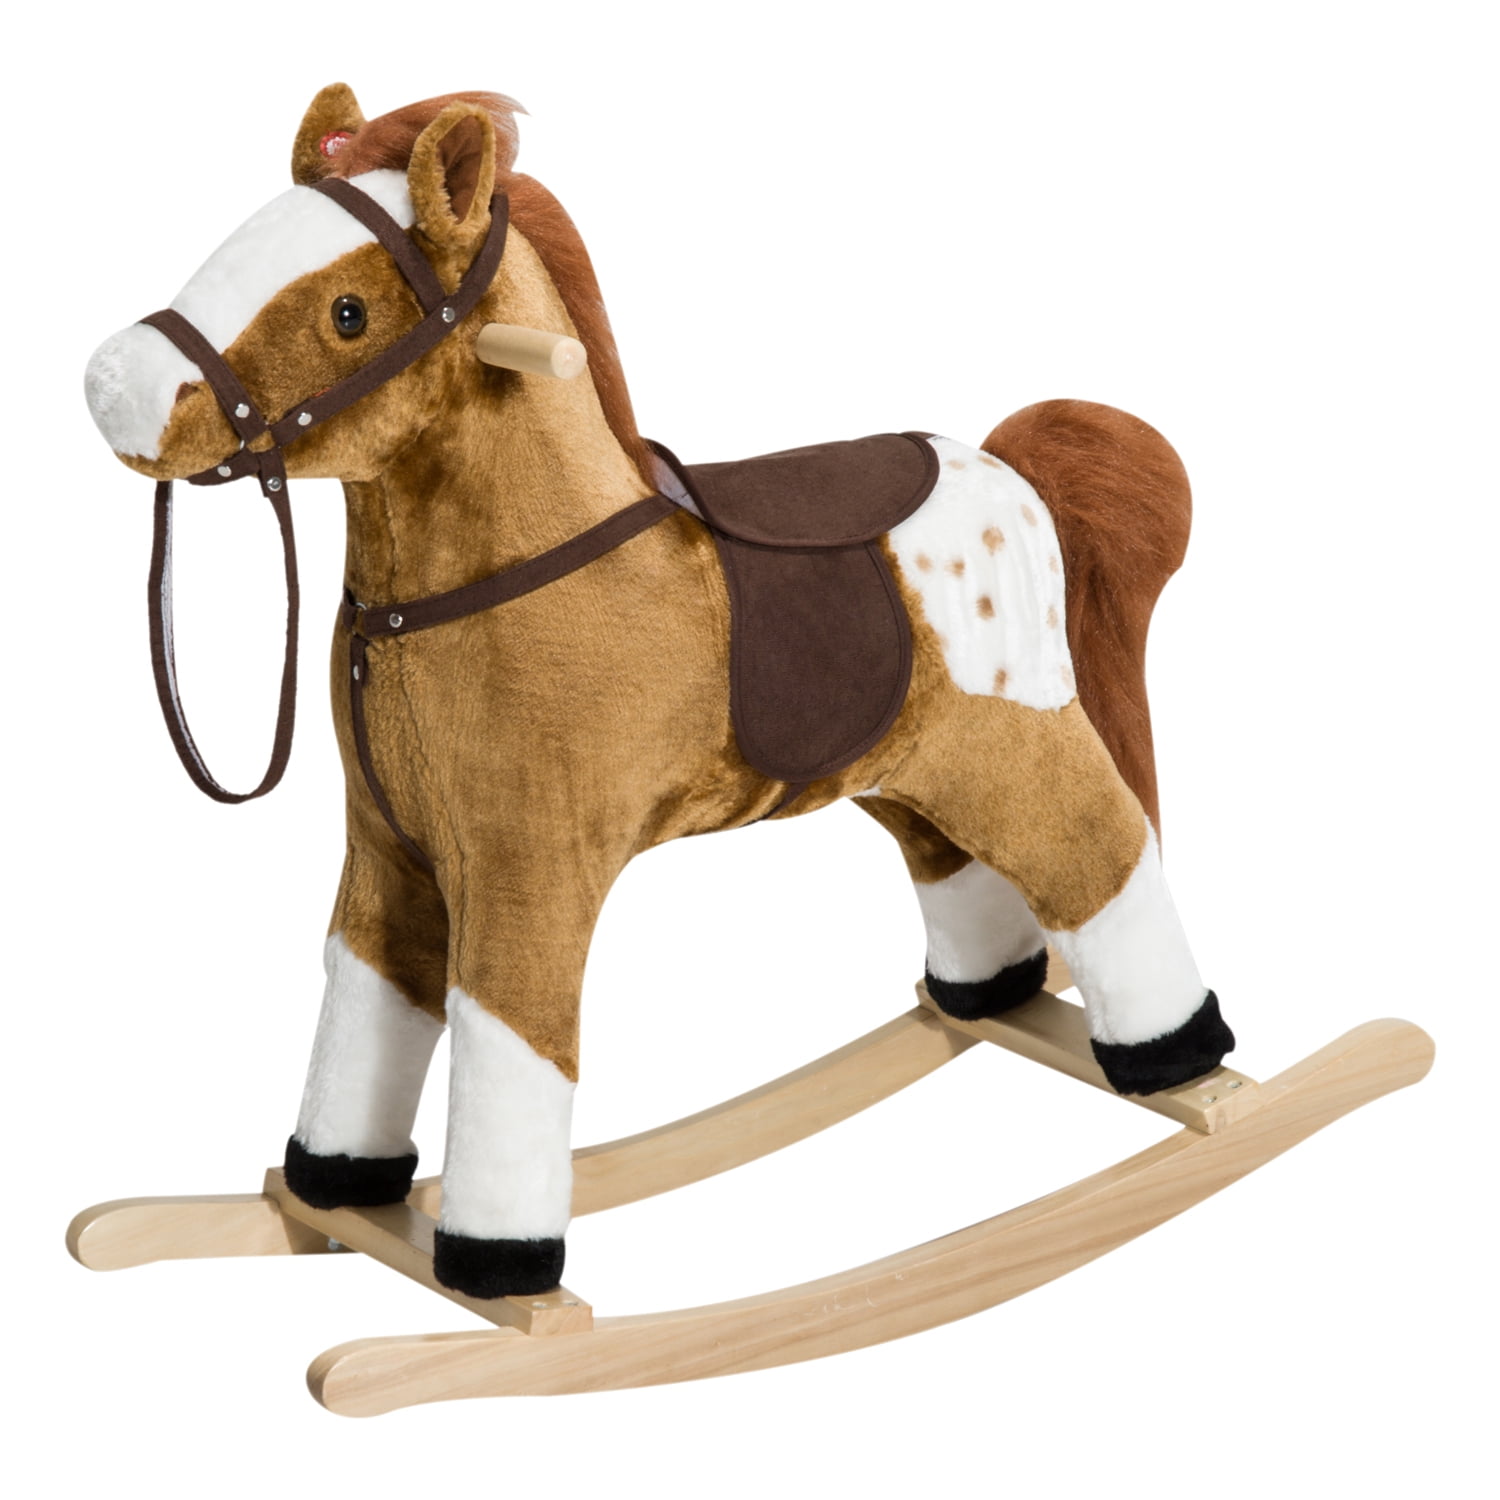 iBonny Stuffed Animal Plush Pony Toy My First Pony Walk Along Toy Realistic Walking Actions with Horse Sounds and Music Brown 